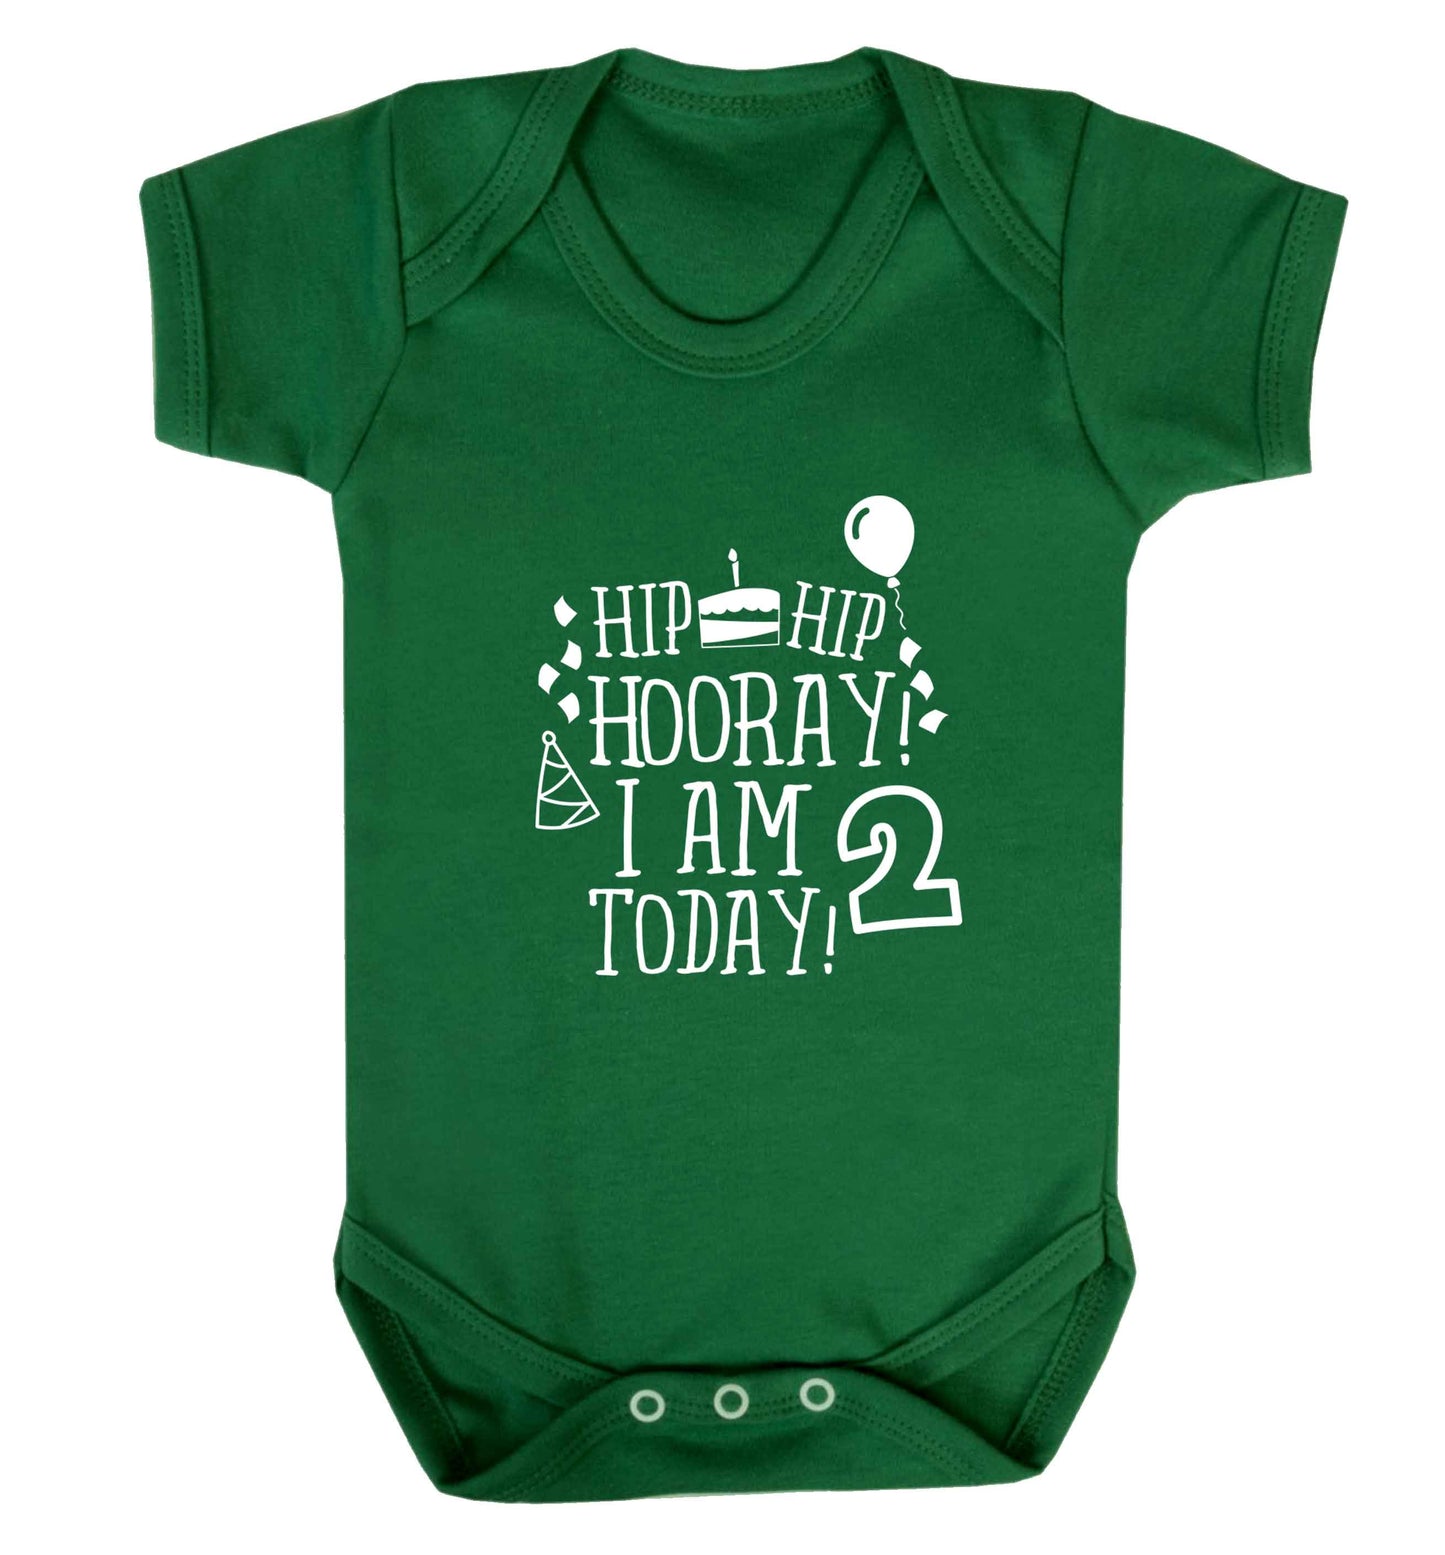 I'm 2 Today baby vest green 18-24 months